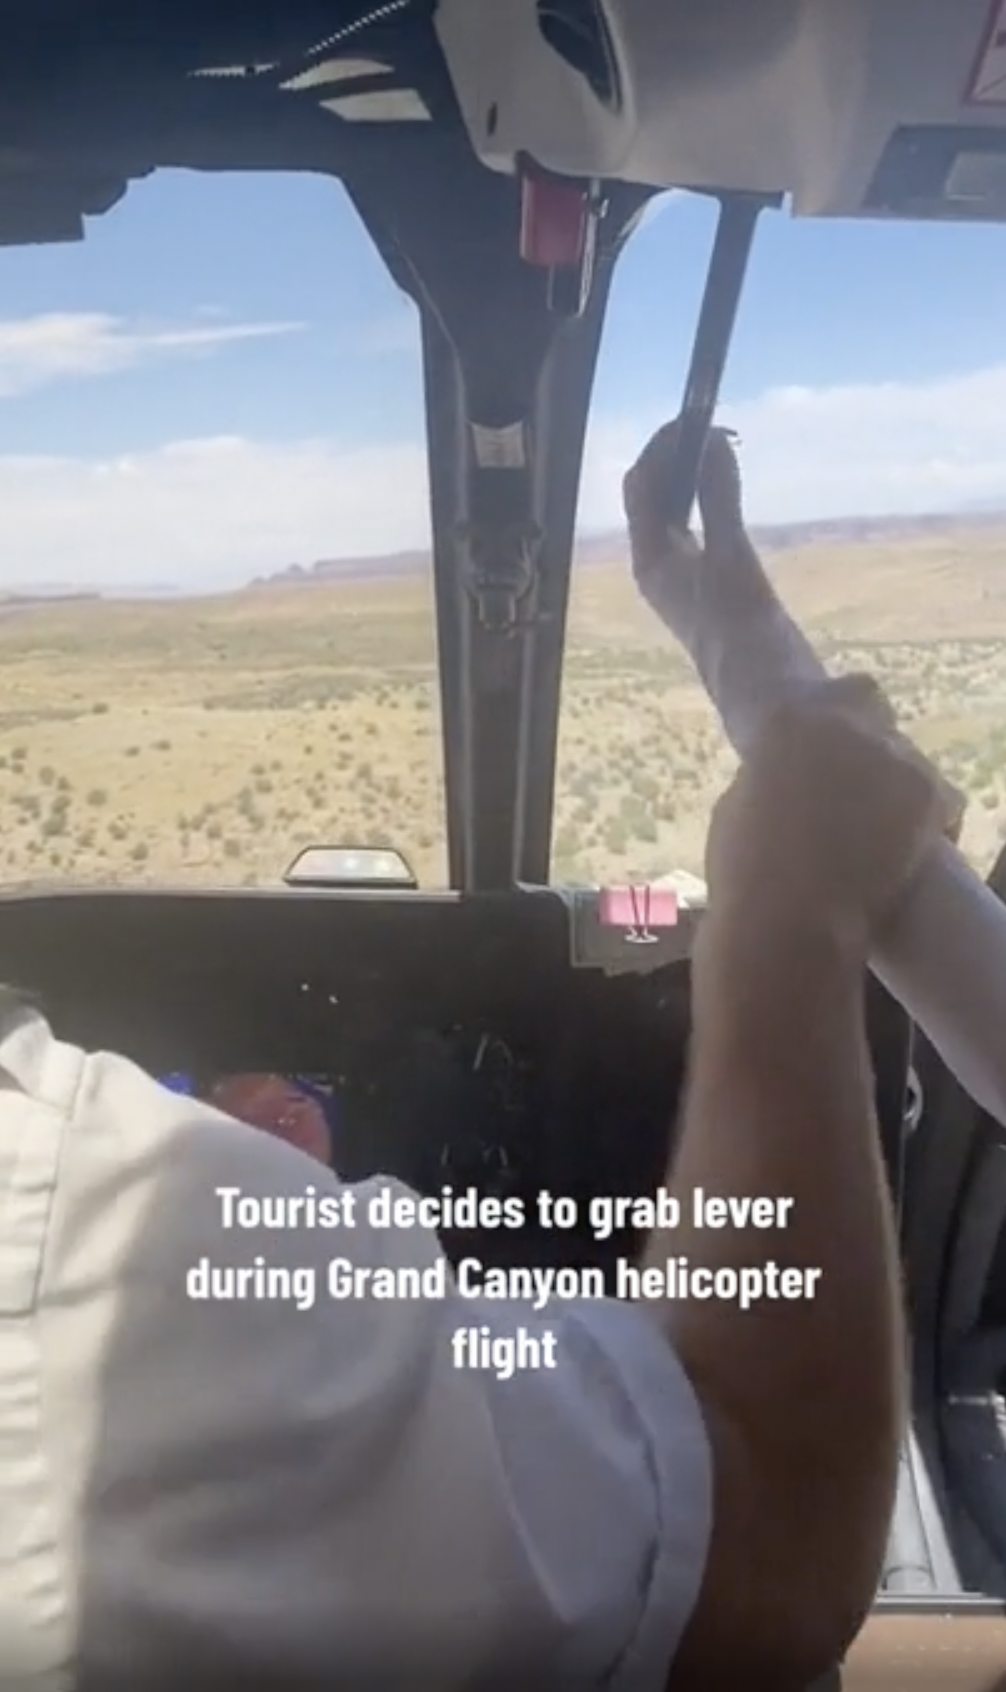 aviation - Tourist decides to grab lever during Grand Canyon helicopter flight